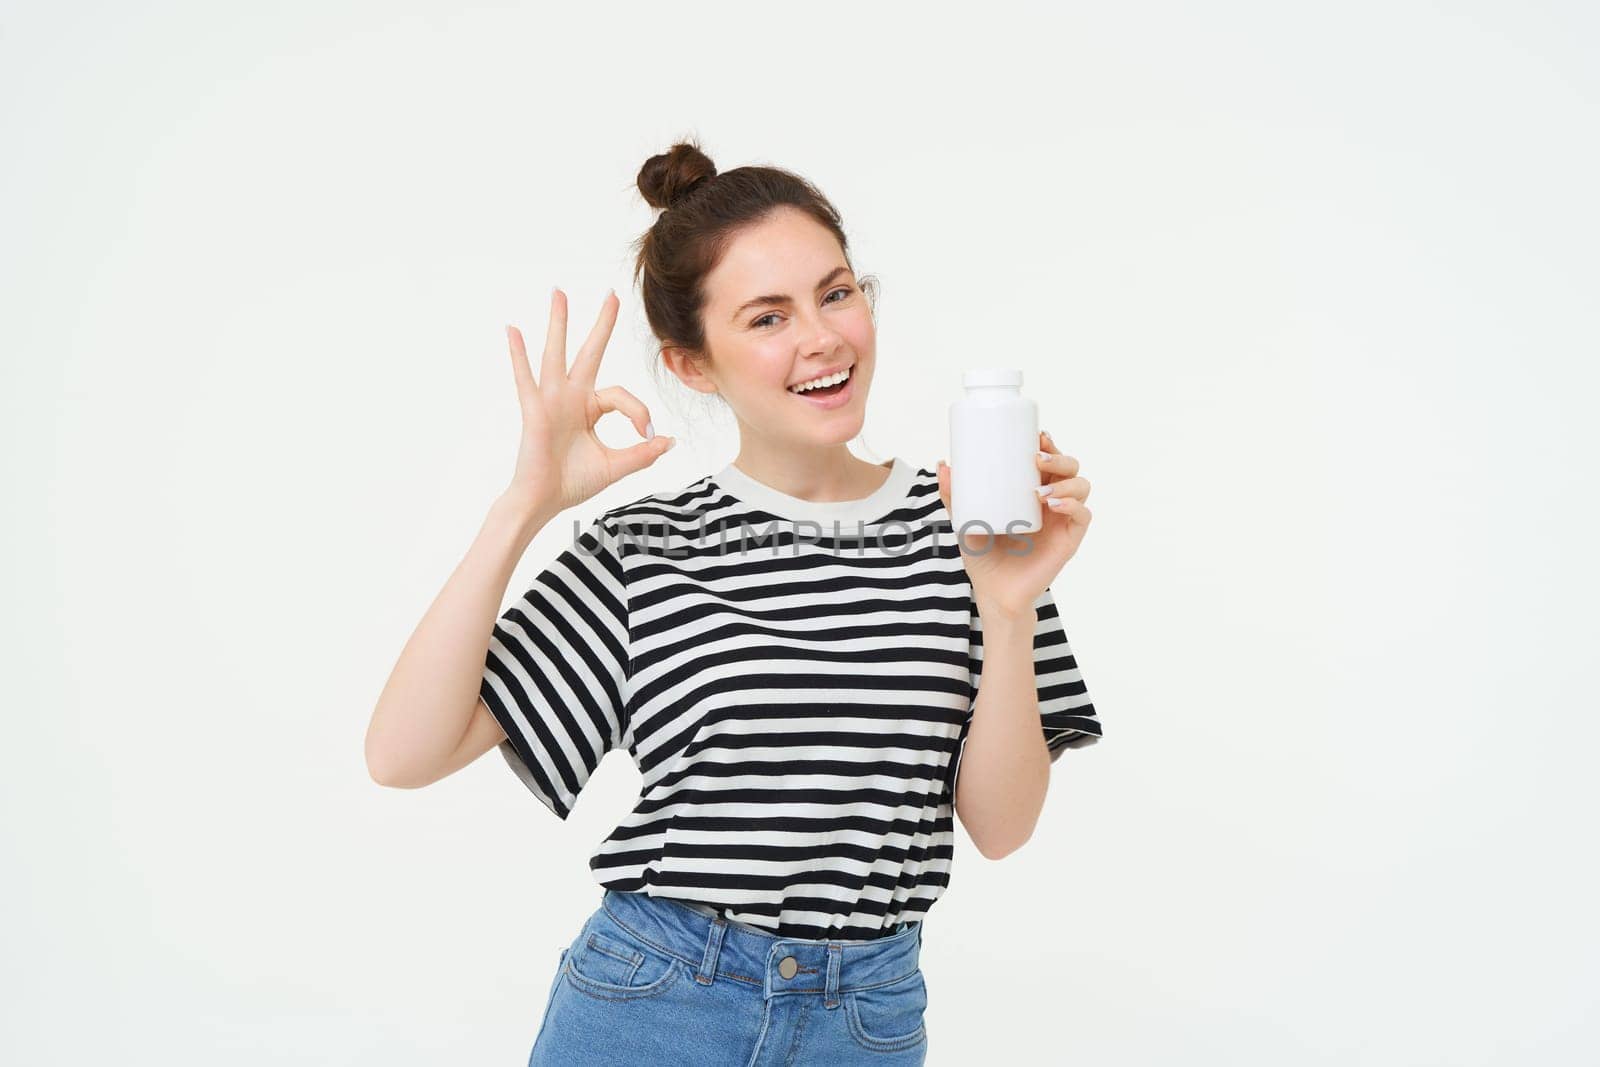 Image of smiling girl recommends dietary supplement, bottle with vitamin c, fish oil treatment, stands over white background.